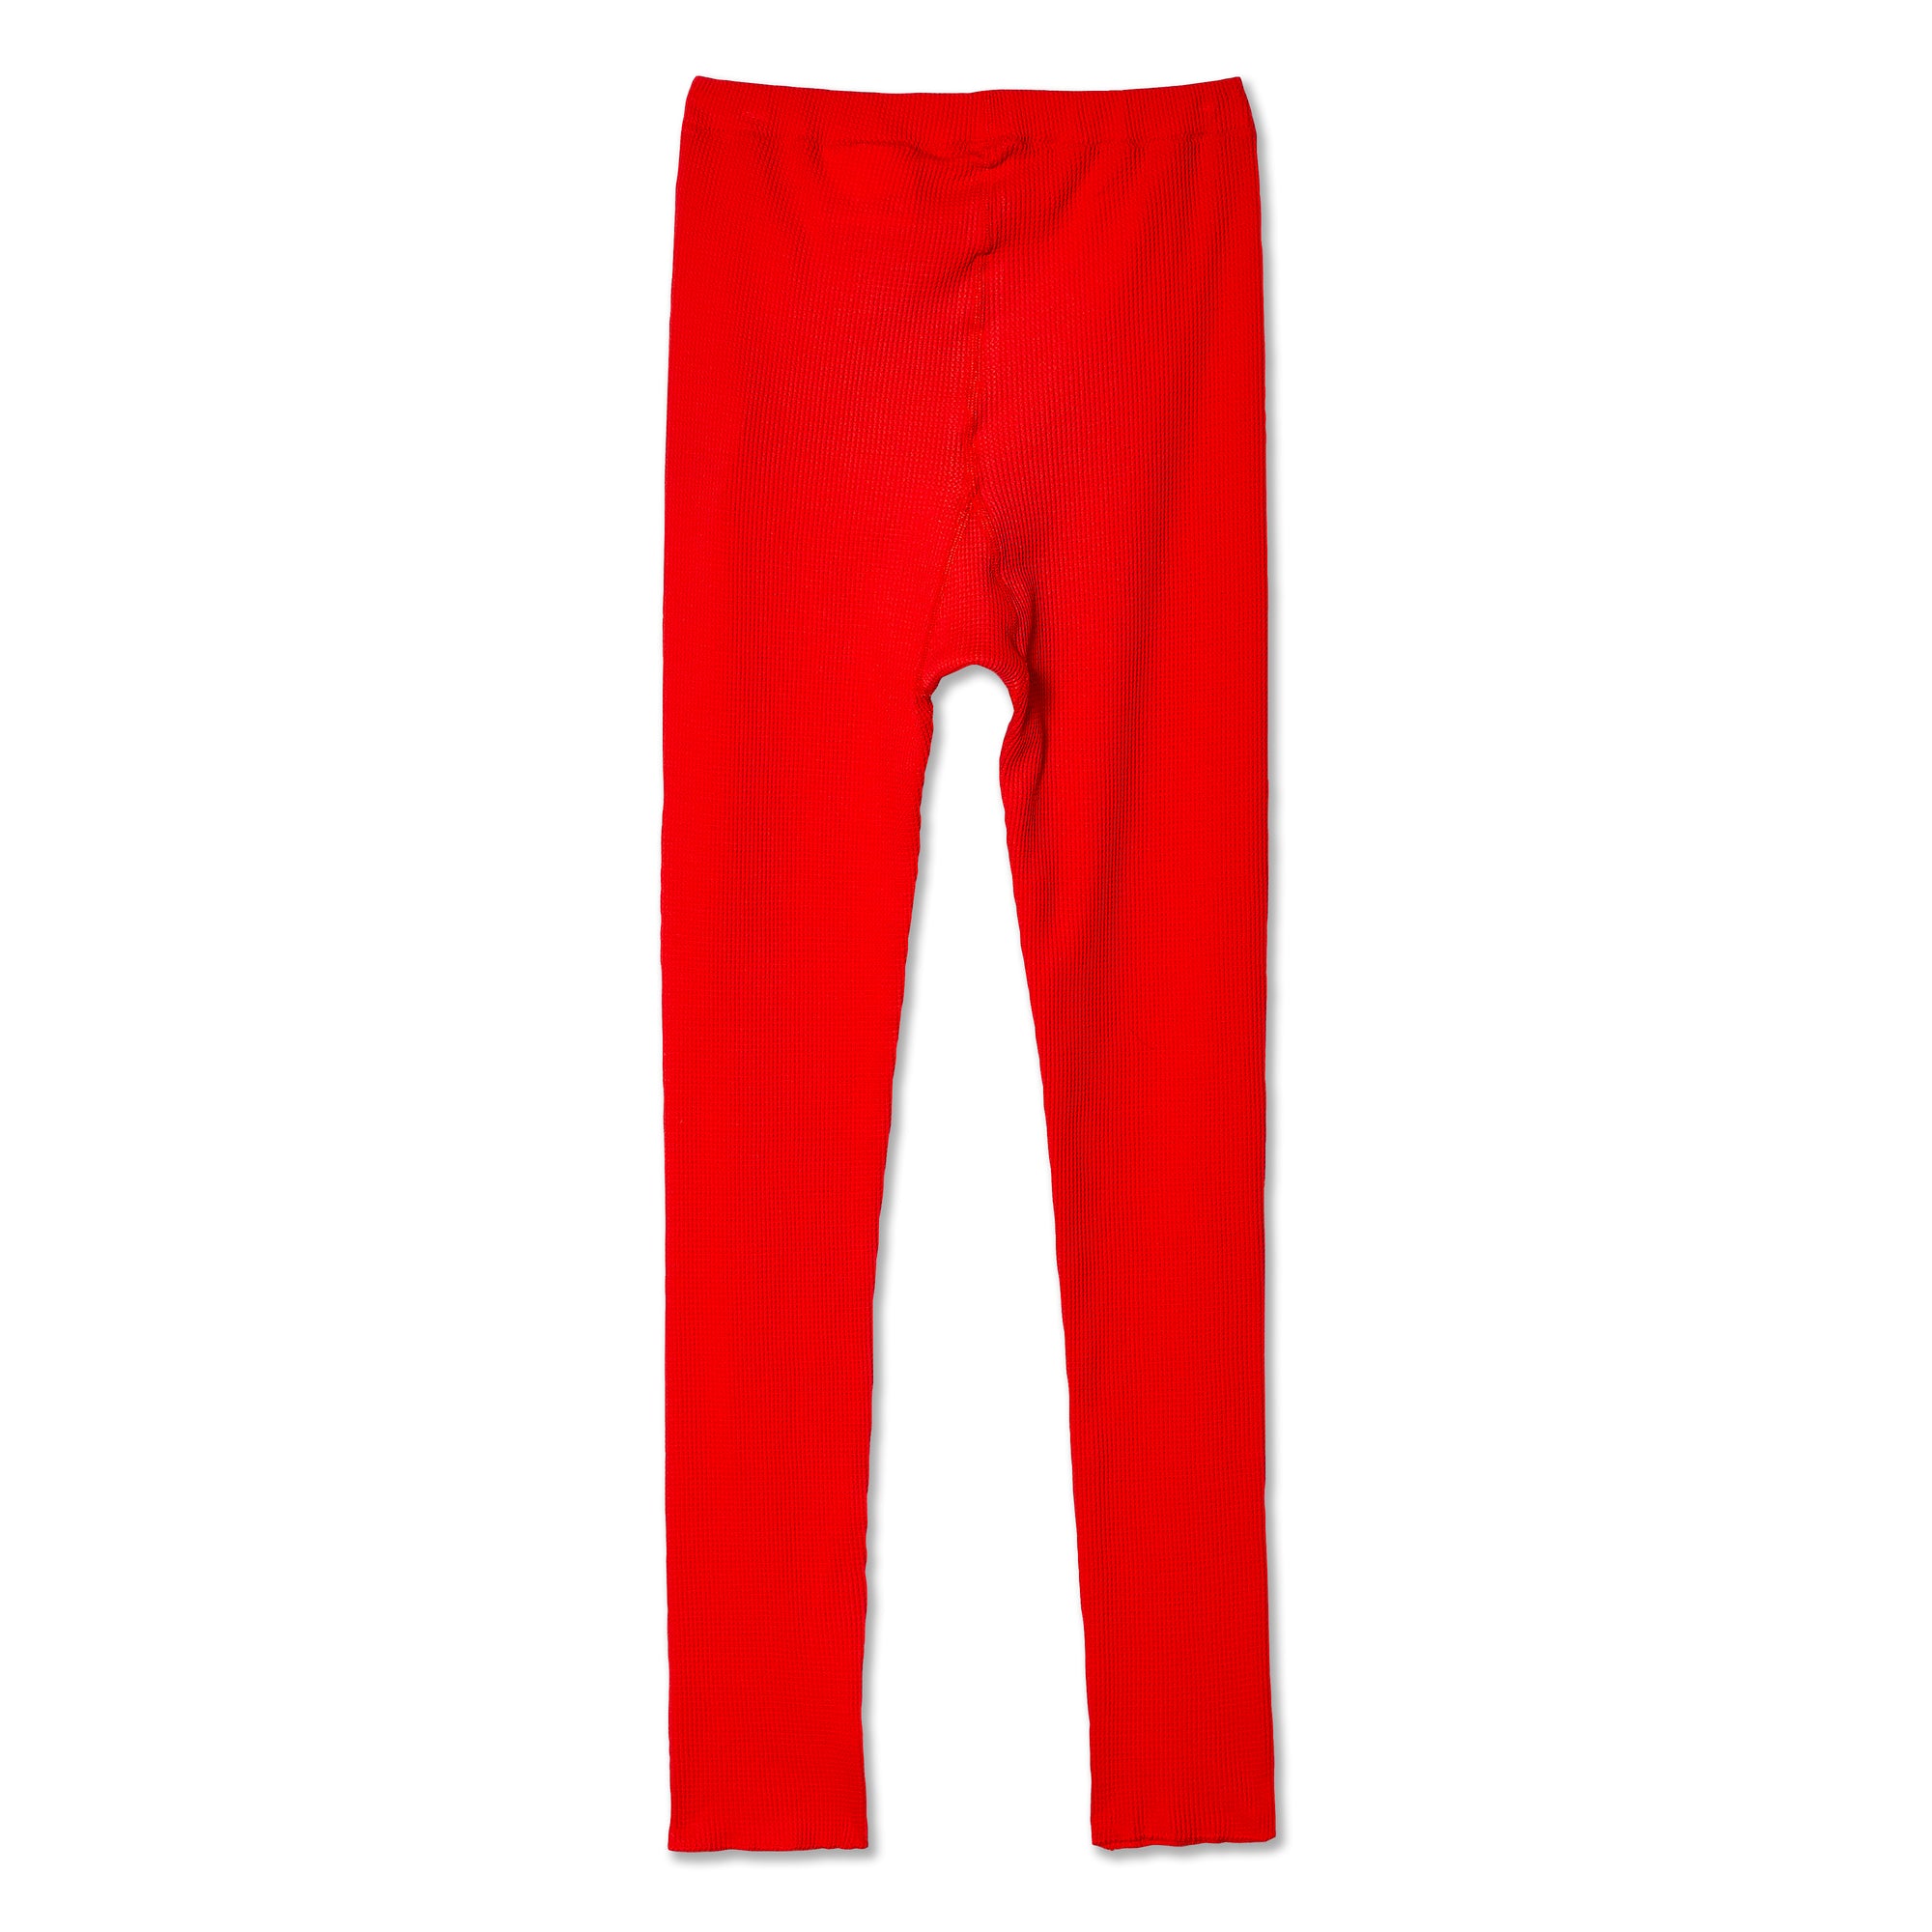 ERL - Men's Waffle Long Johns Jersey - (Red) view 2